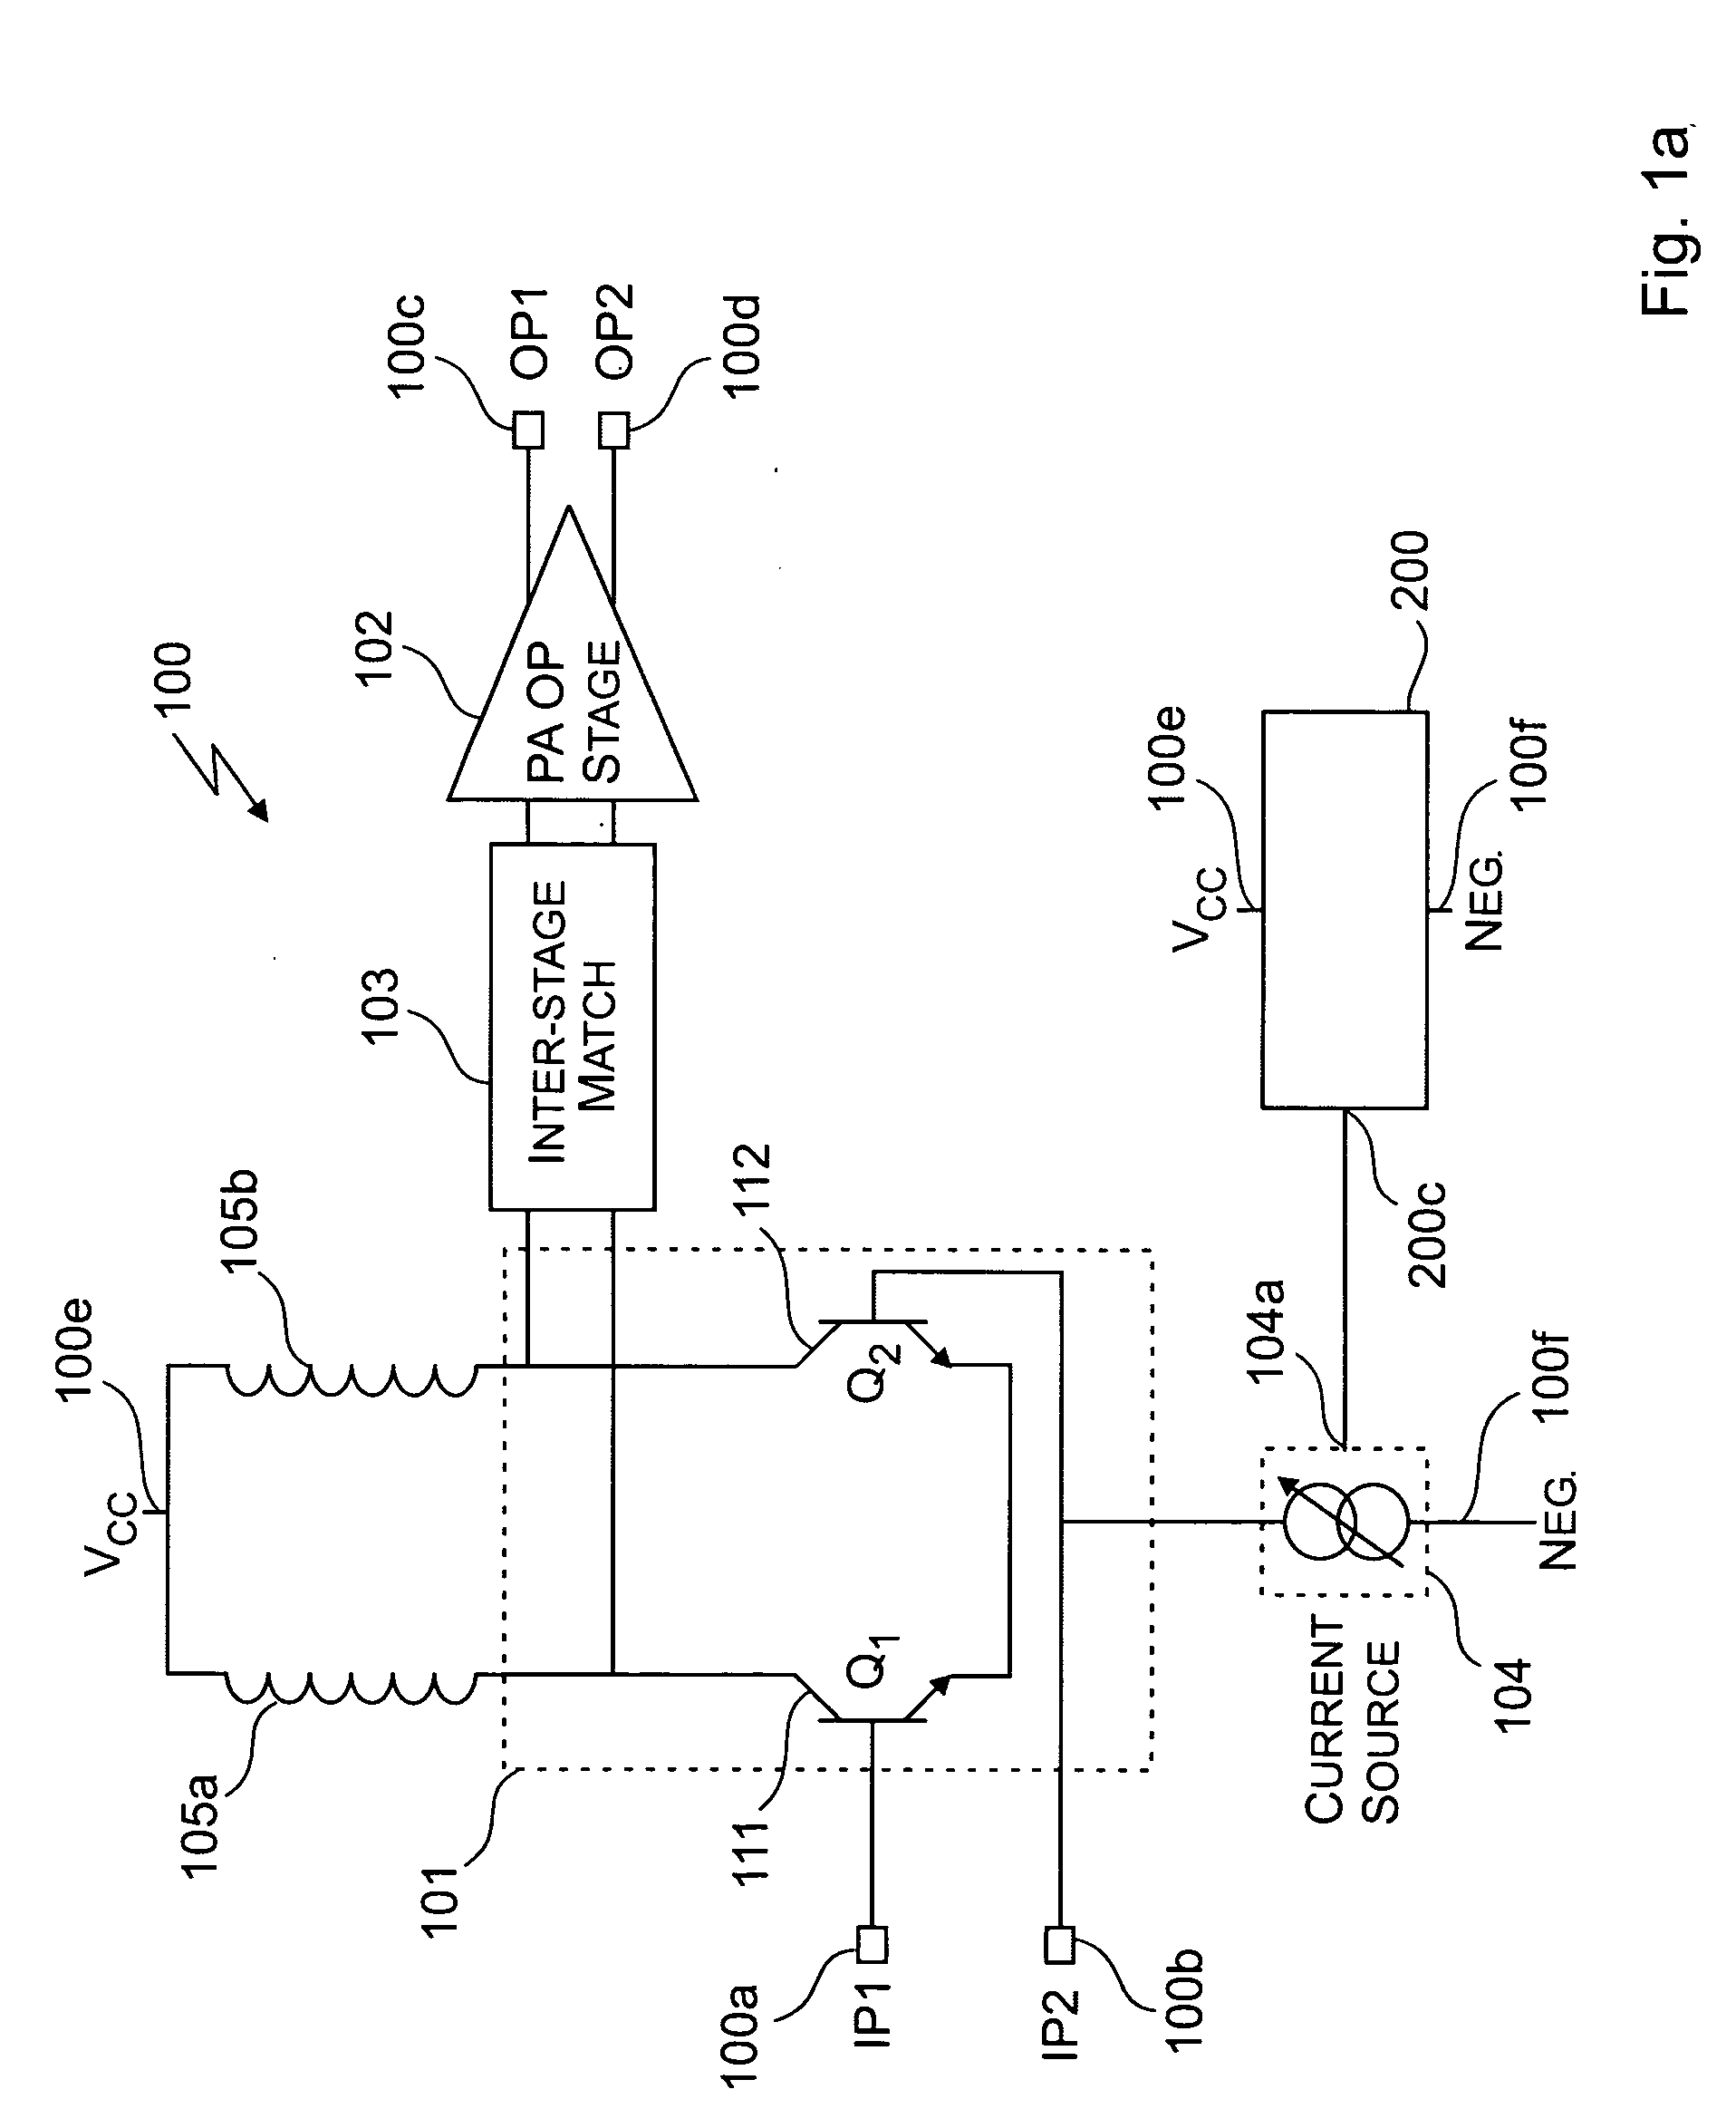 Power level controlling of first amplification stage for an integrated RF power amplifier